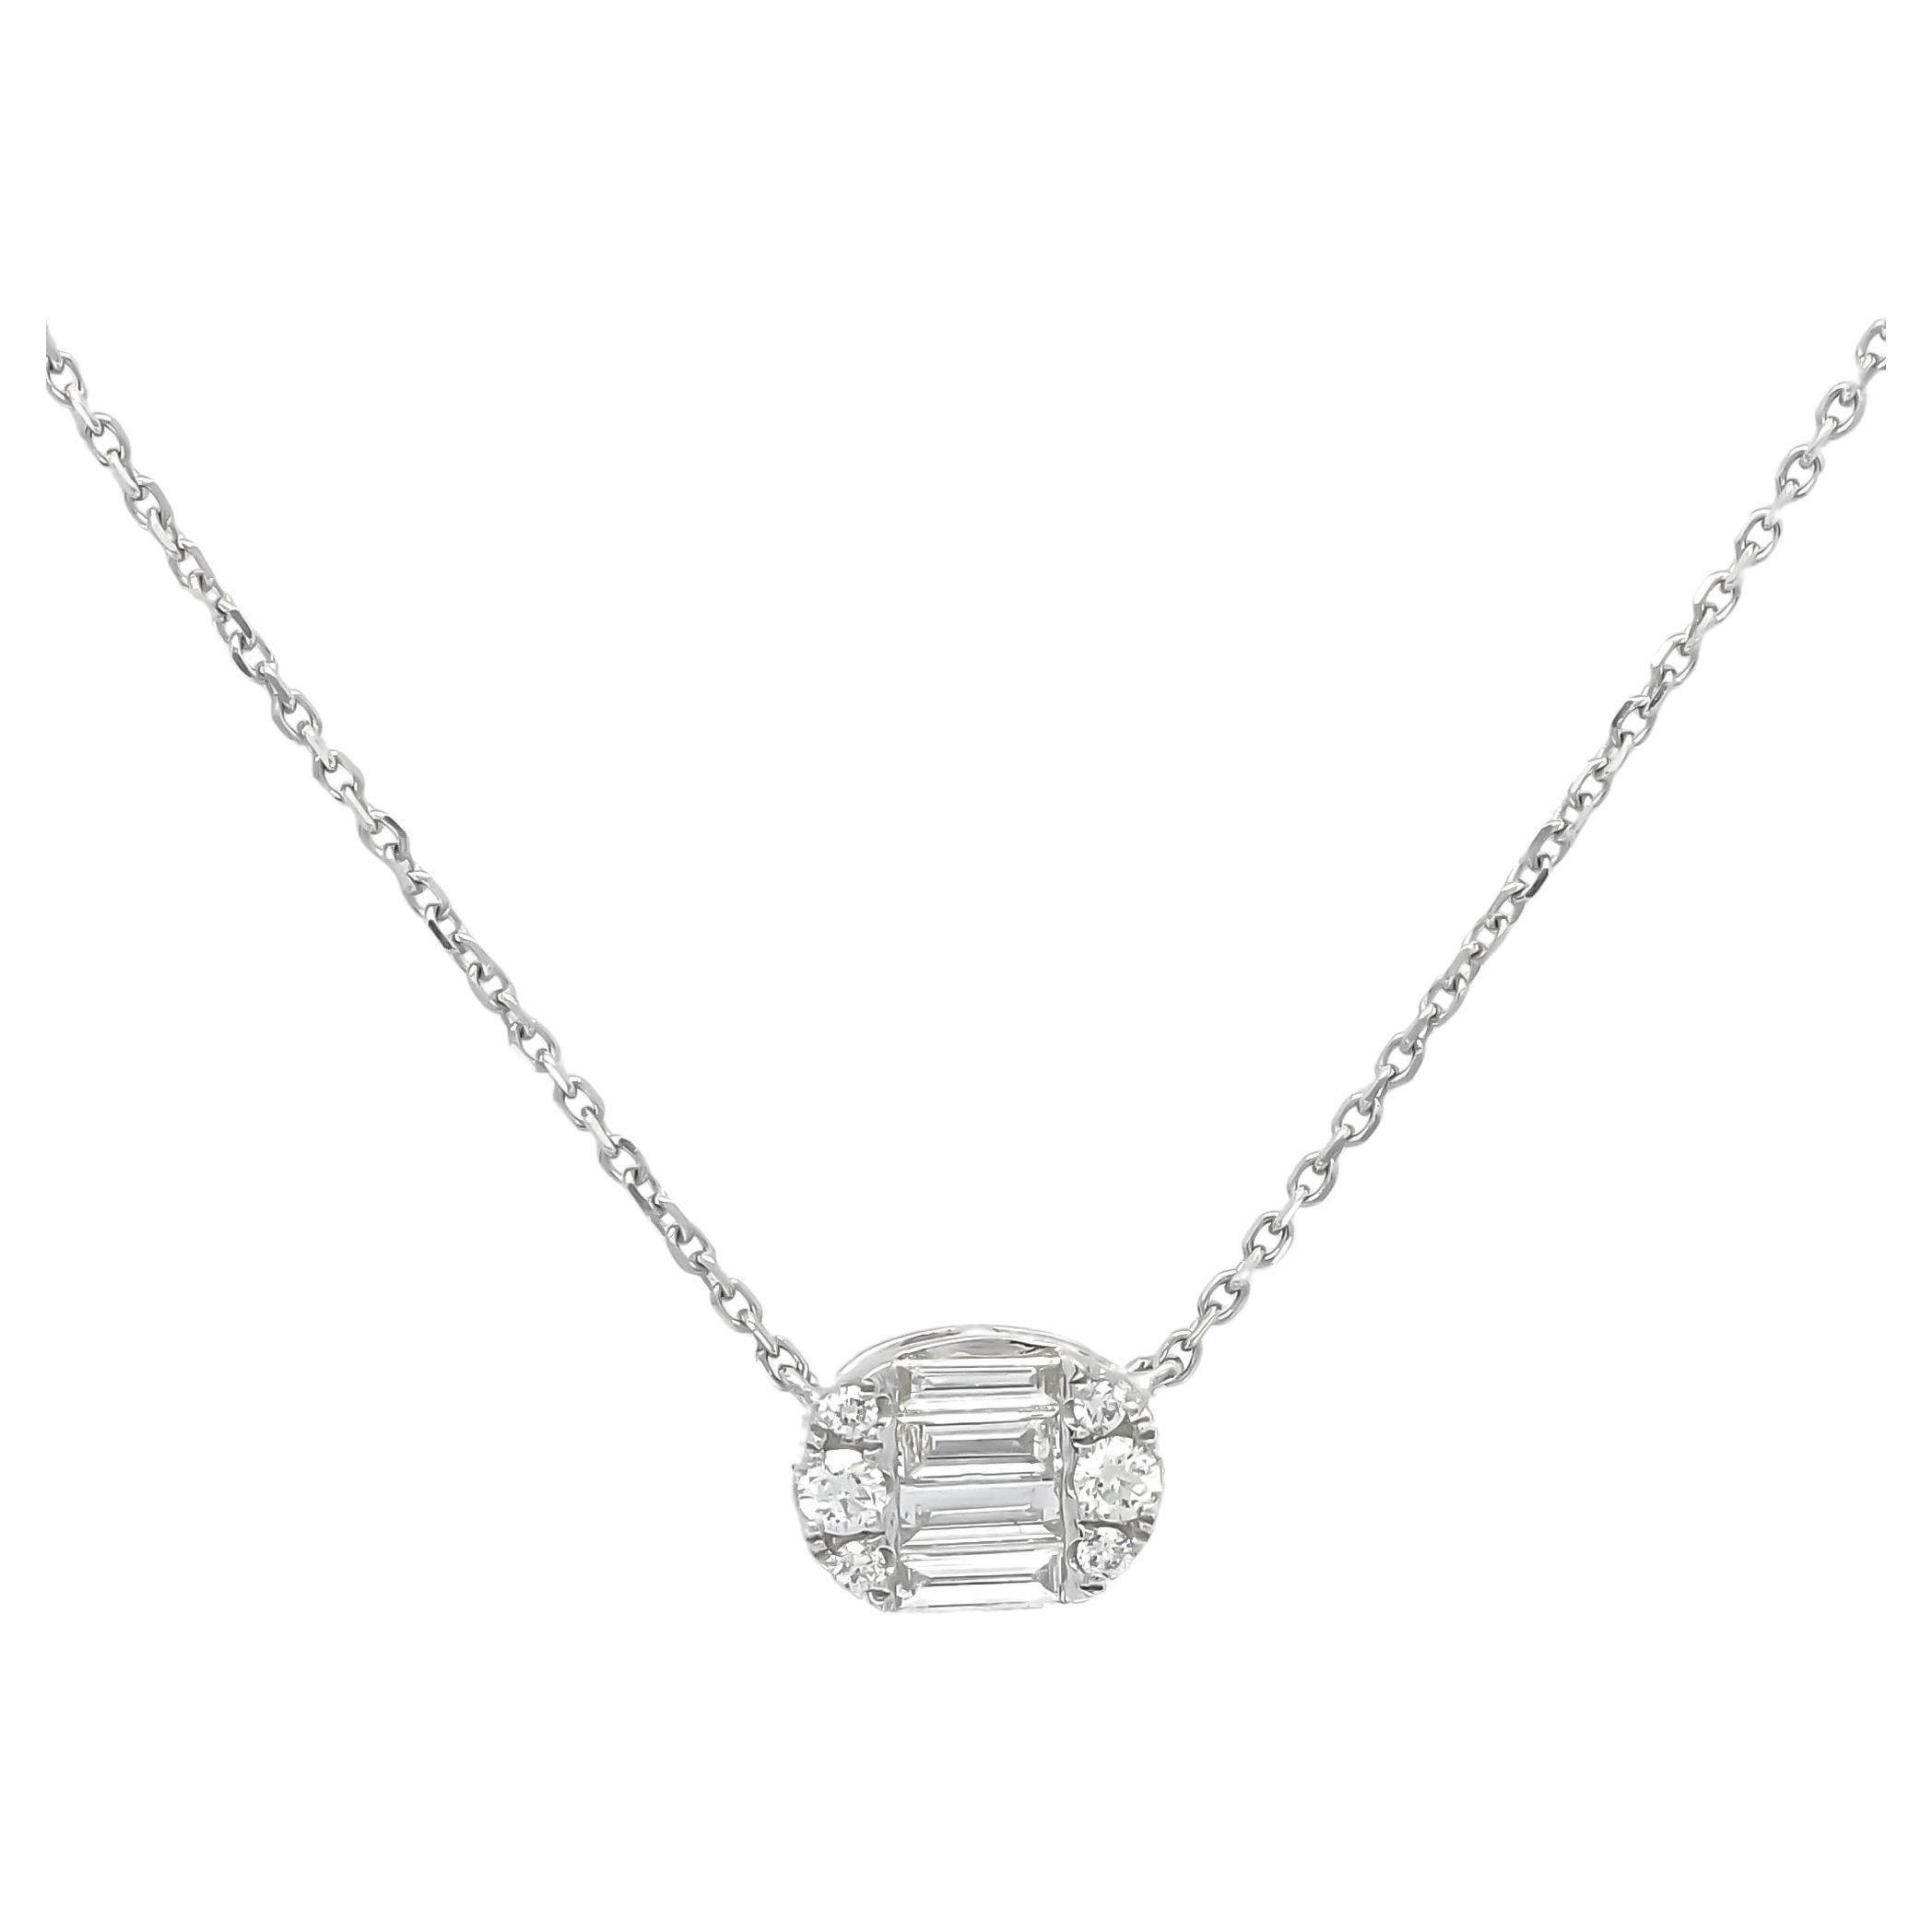 Natural Diamond Pendant 0.40 cts 18KT White Gold Oval Shape Chain Necklace  